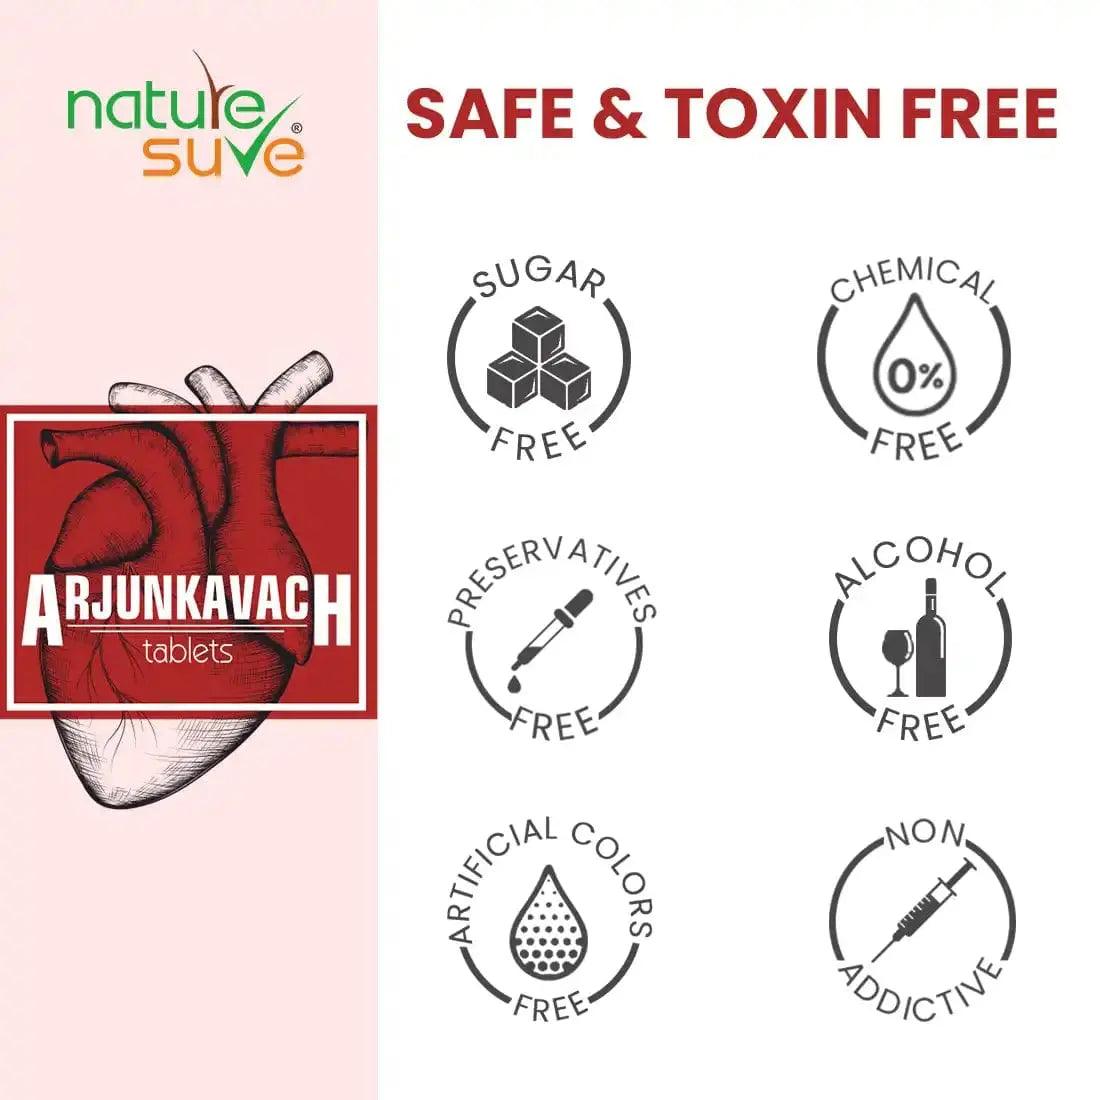 Nature Sure Arjun Kavach Tablets for Healthy Heart Are Safe and Toxin Free